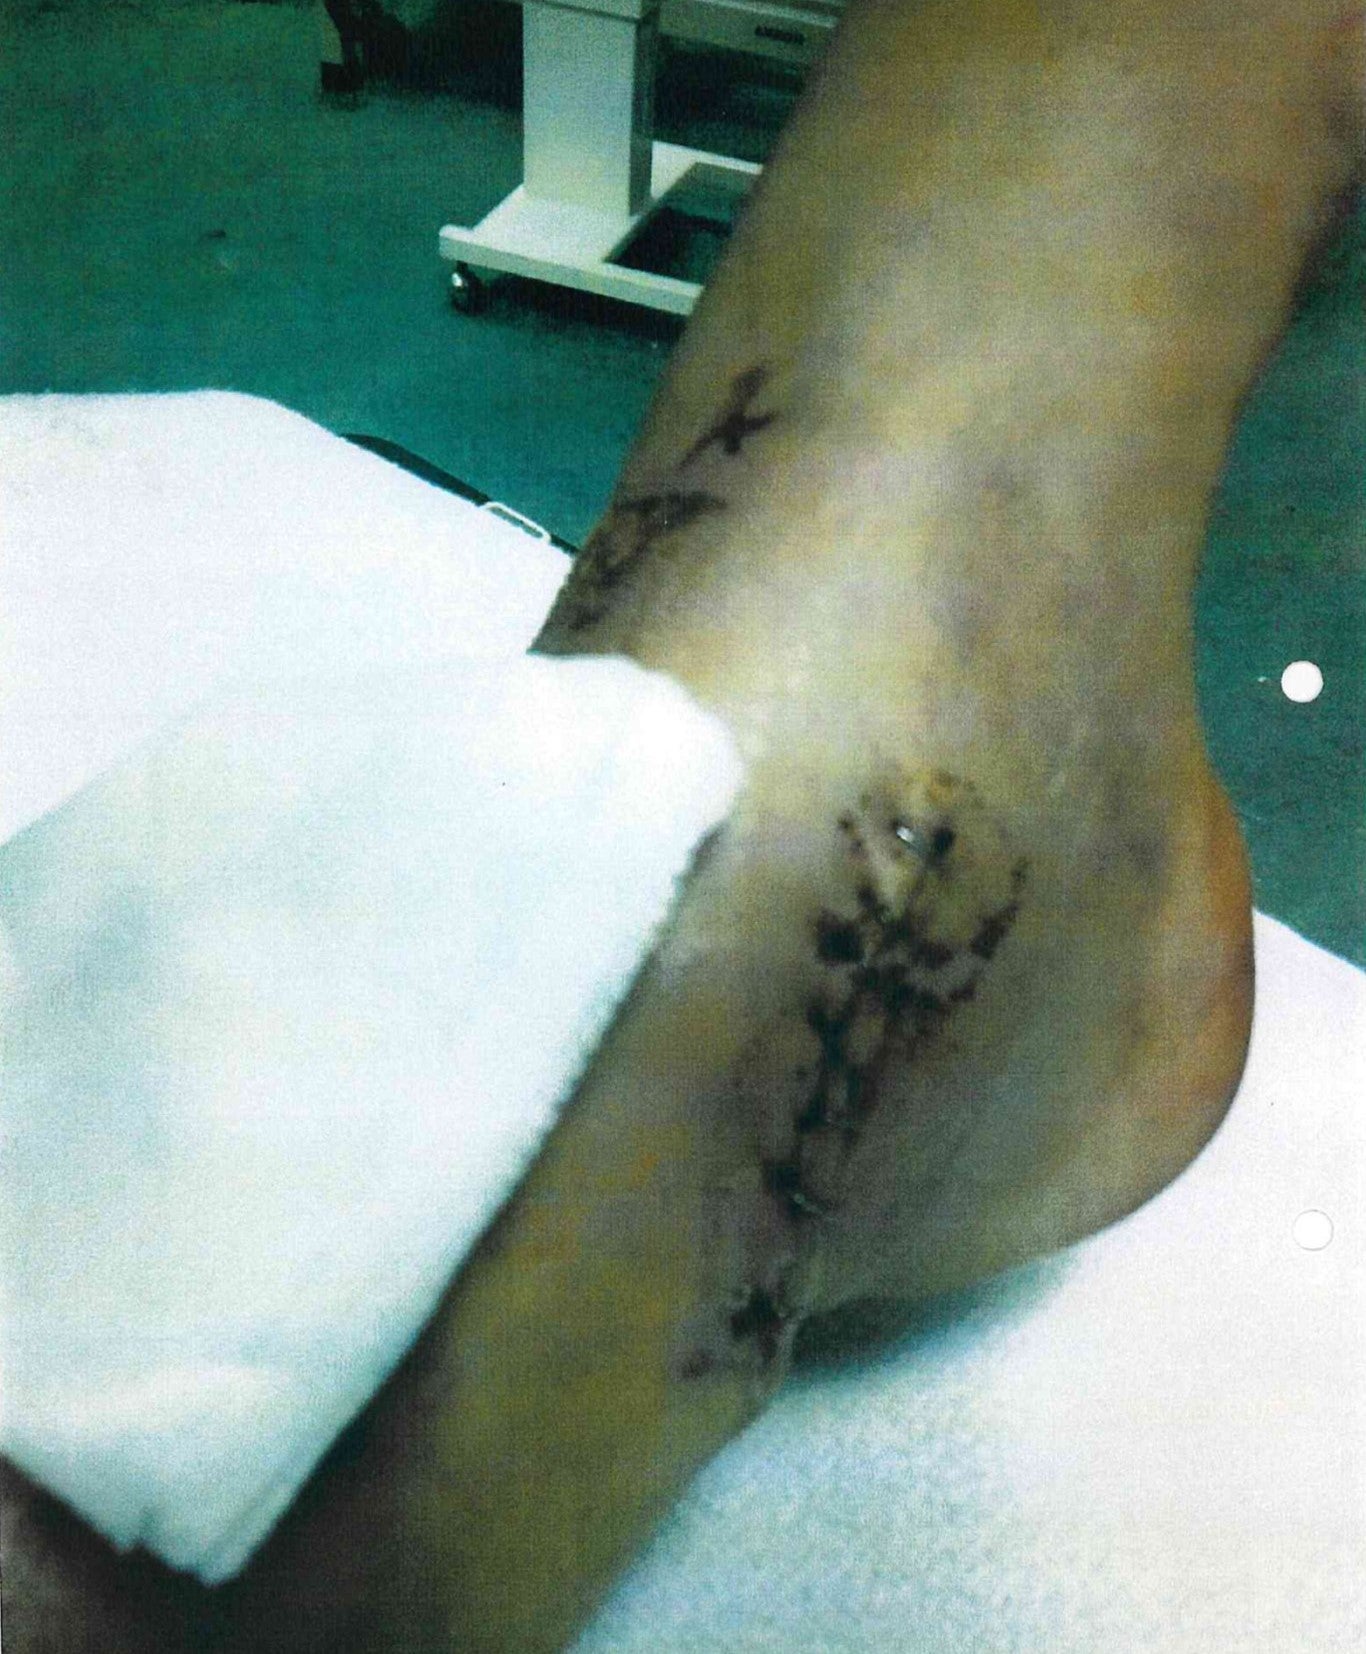 Maria’s ankle bone was shattered into tiny pieces (Collect/PA Real Life) NOTE TO EDITORS: This image must only be used in conjunction with PA Real Life story REAL LIFE MotorbikeCrash. All usage is subject to a fee or incorporated into your outlet’s agreed content package. Find copy in full on PA Explore or contact PA Real Life at RealLife2@pamediagroup.com or on 020 7963 7175 for access or queries